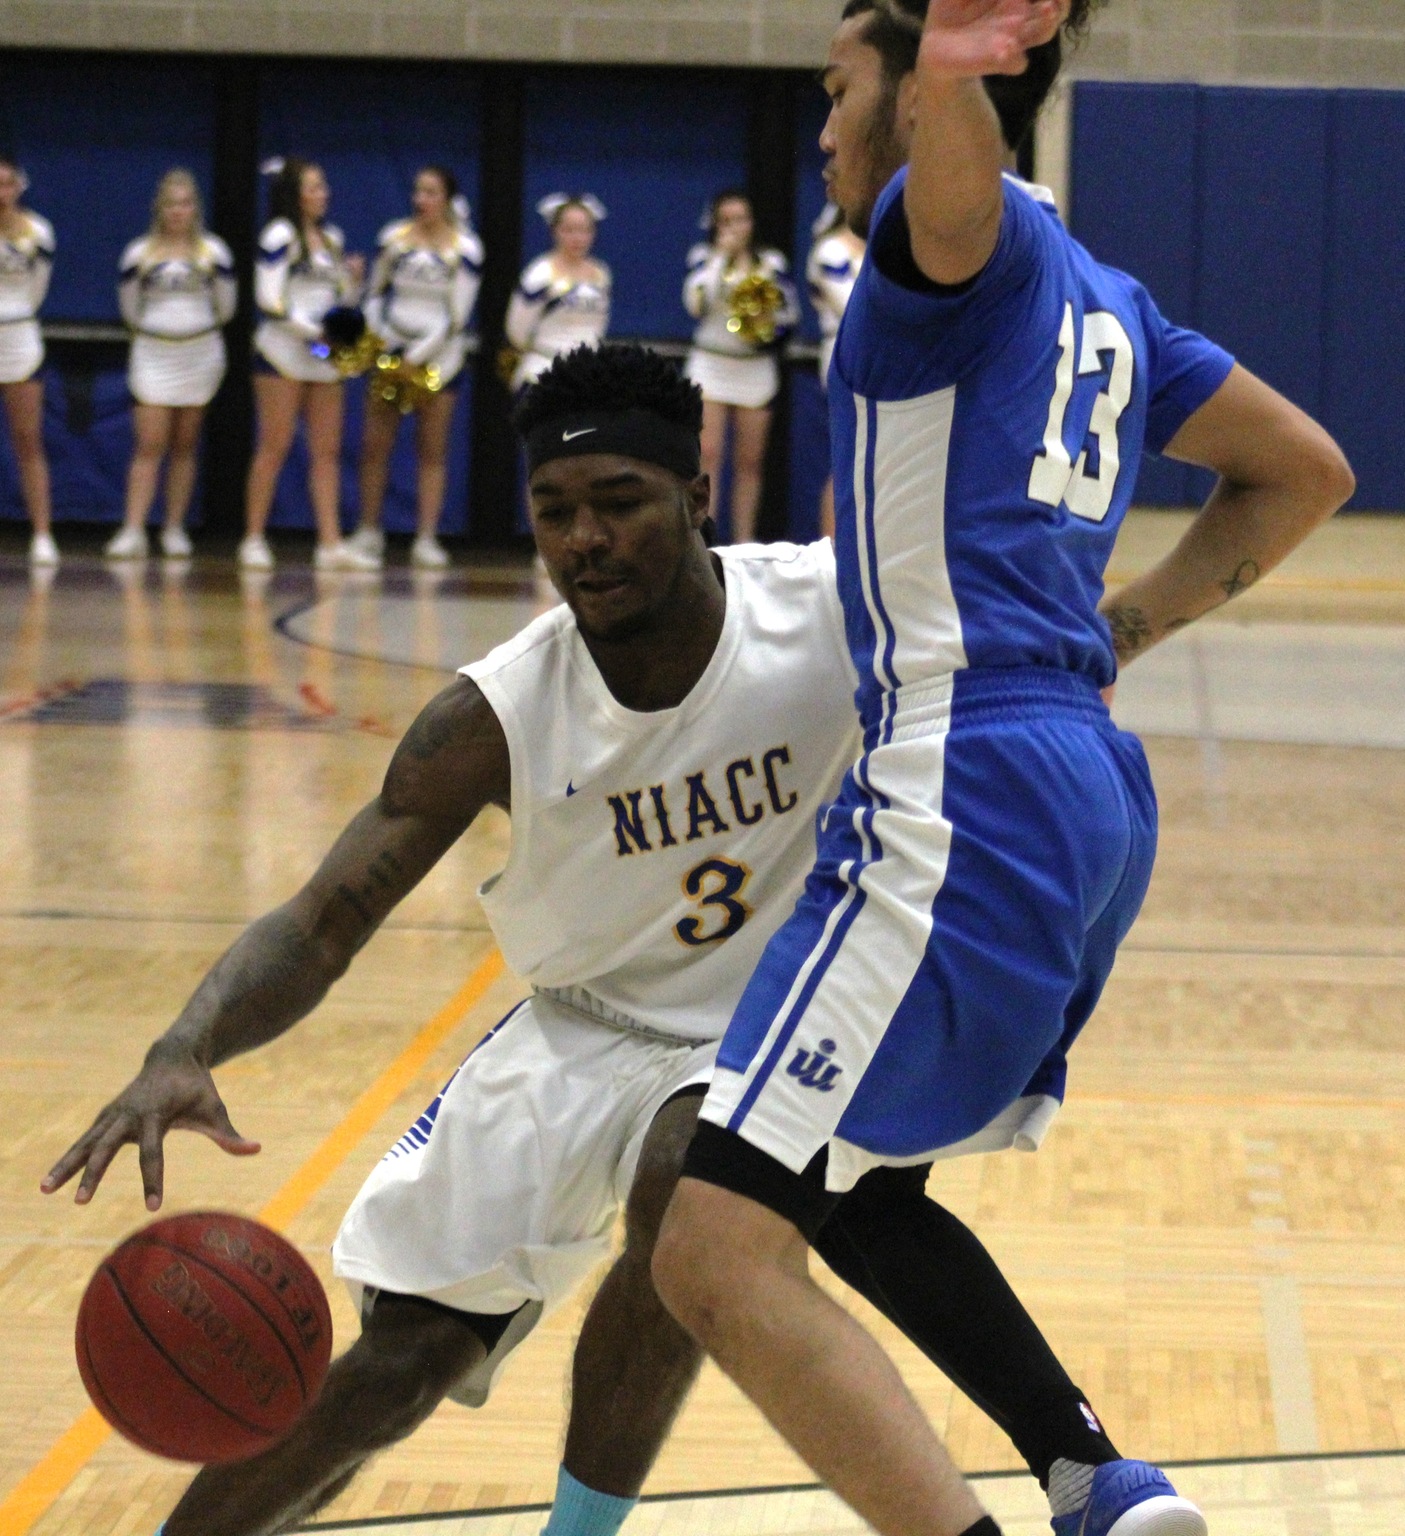 NIACC's Orrington Hamilton drives to the basket in Saturday's game against Iowa Western.